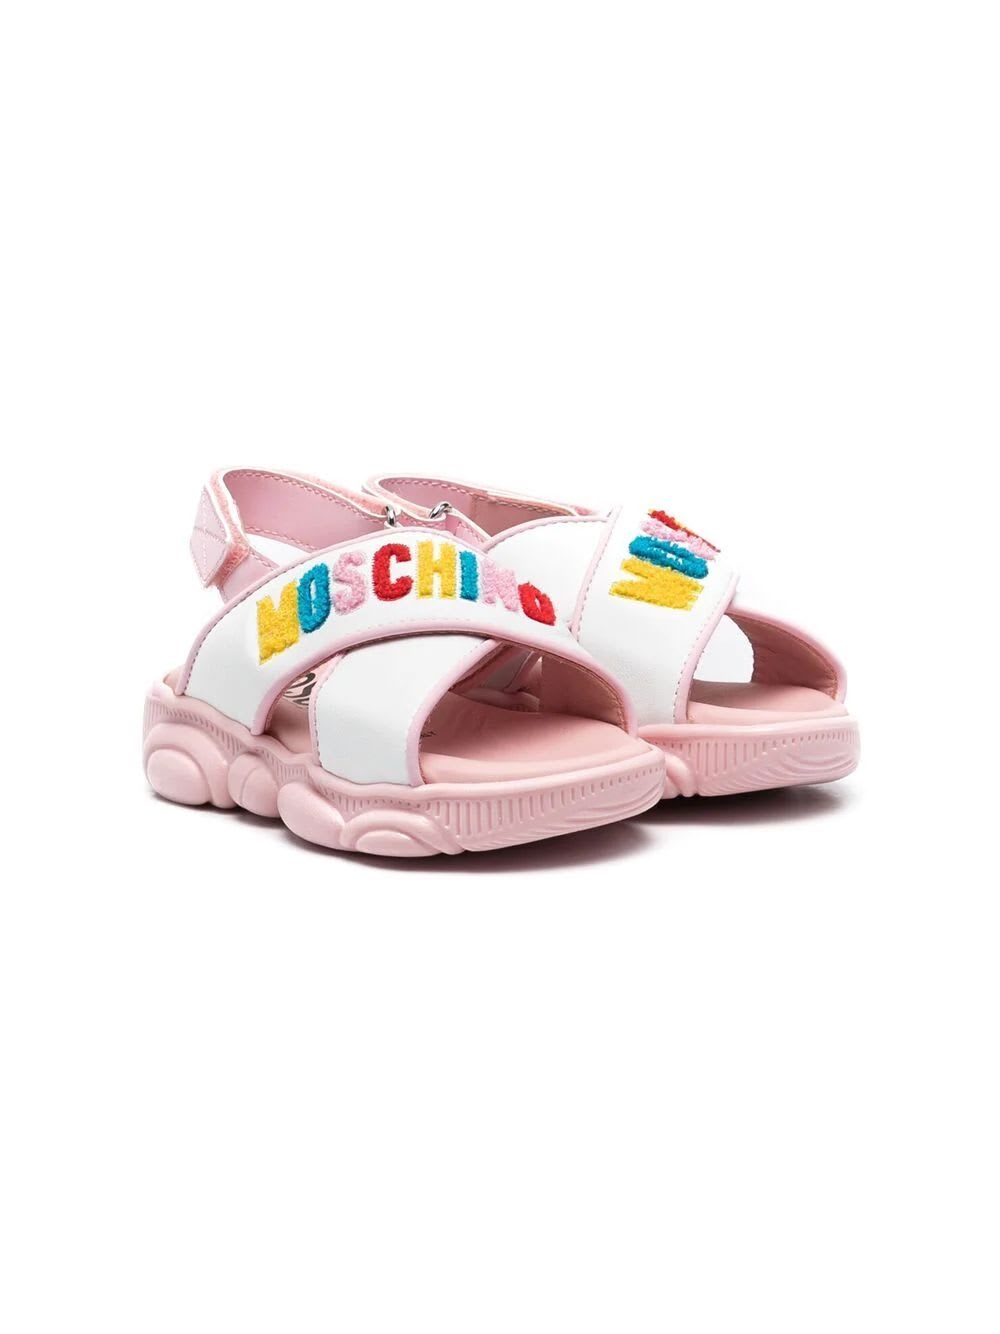 Moschino Crossover Sandals With Tear